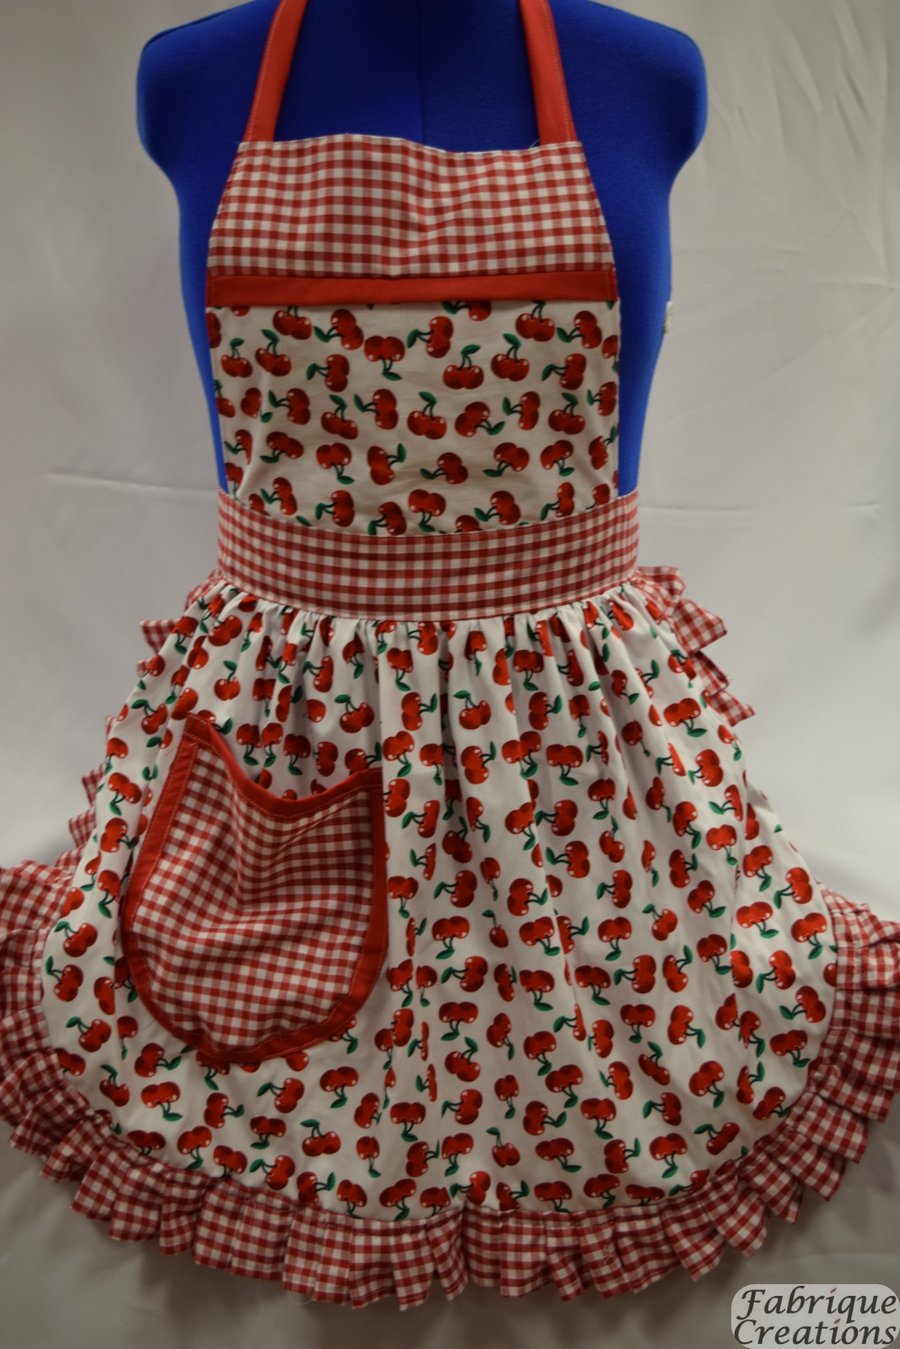 Vintage 50s Style Full Apron Pinny - White & Red - Cherries with Gingham Trim